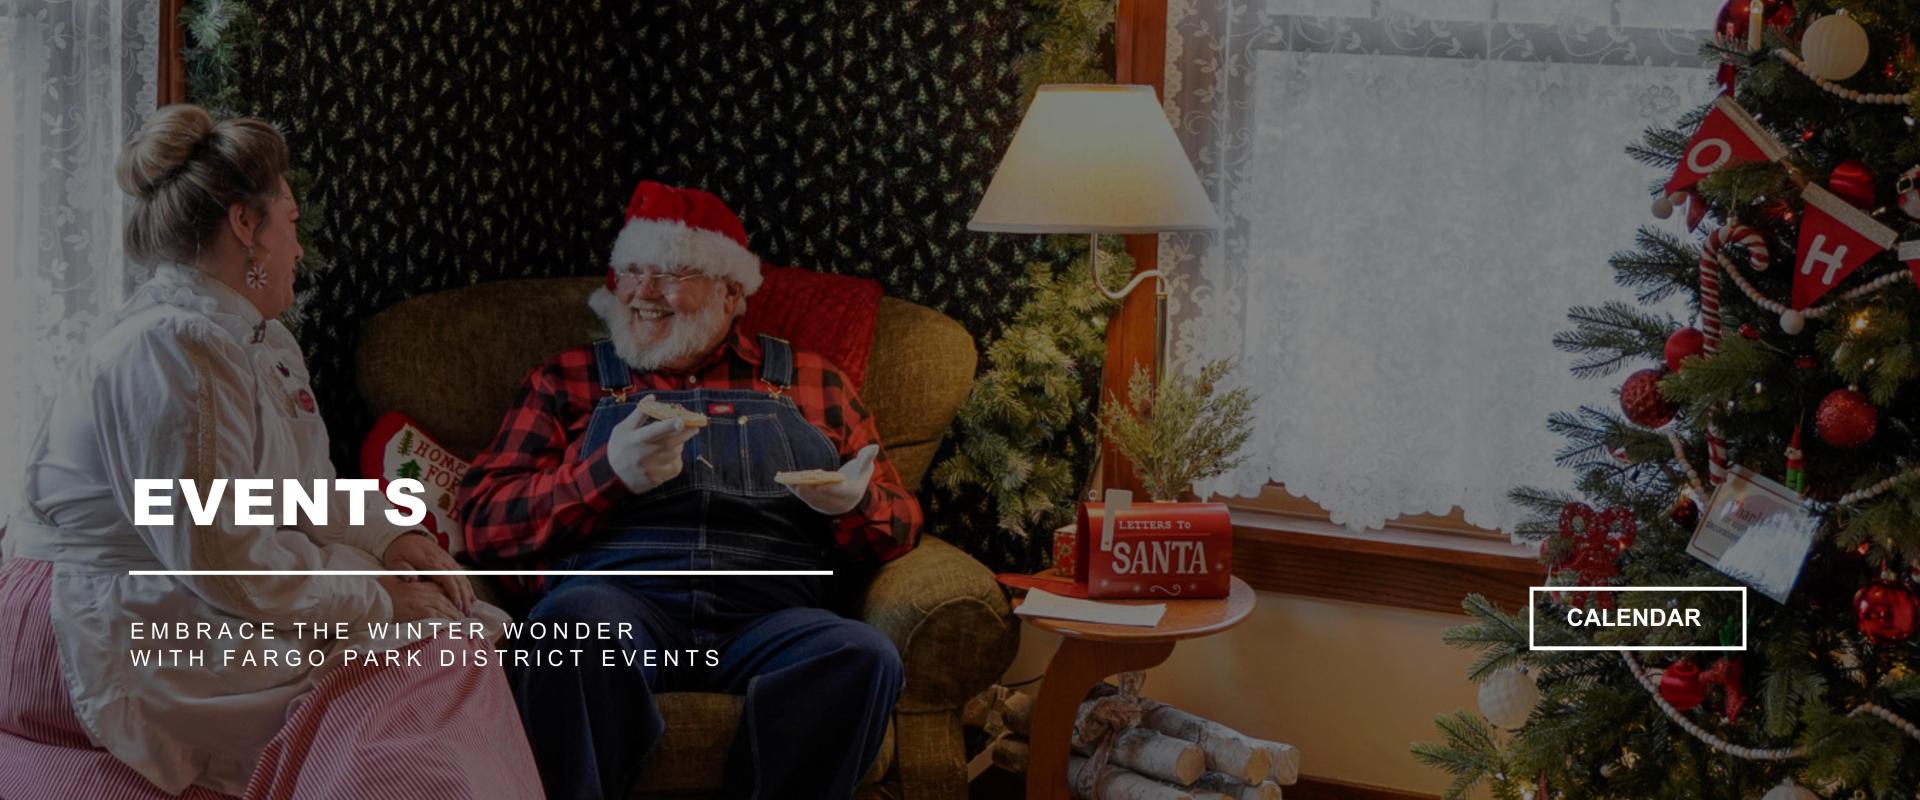 Santa & Mrs. Claus sitting in chairs, talking and eating cookies in a house next to a lamp and christmas tree - EVENTS - Embrace the winter wonder with Fargo Park District Events - CALENDAR button on the right